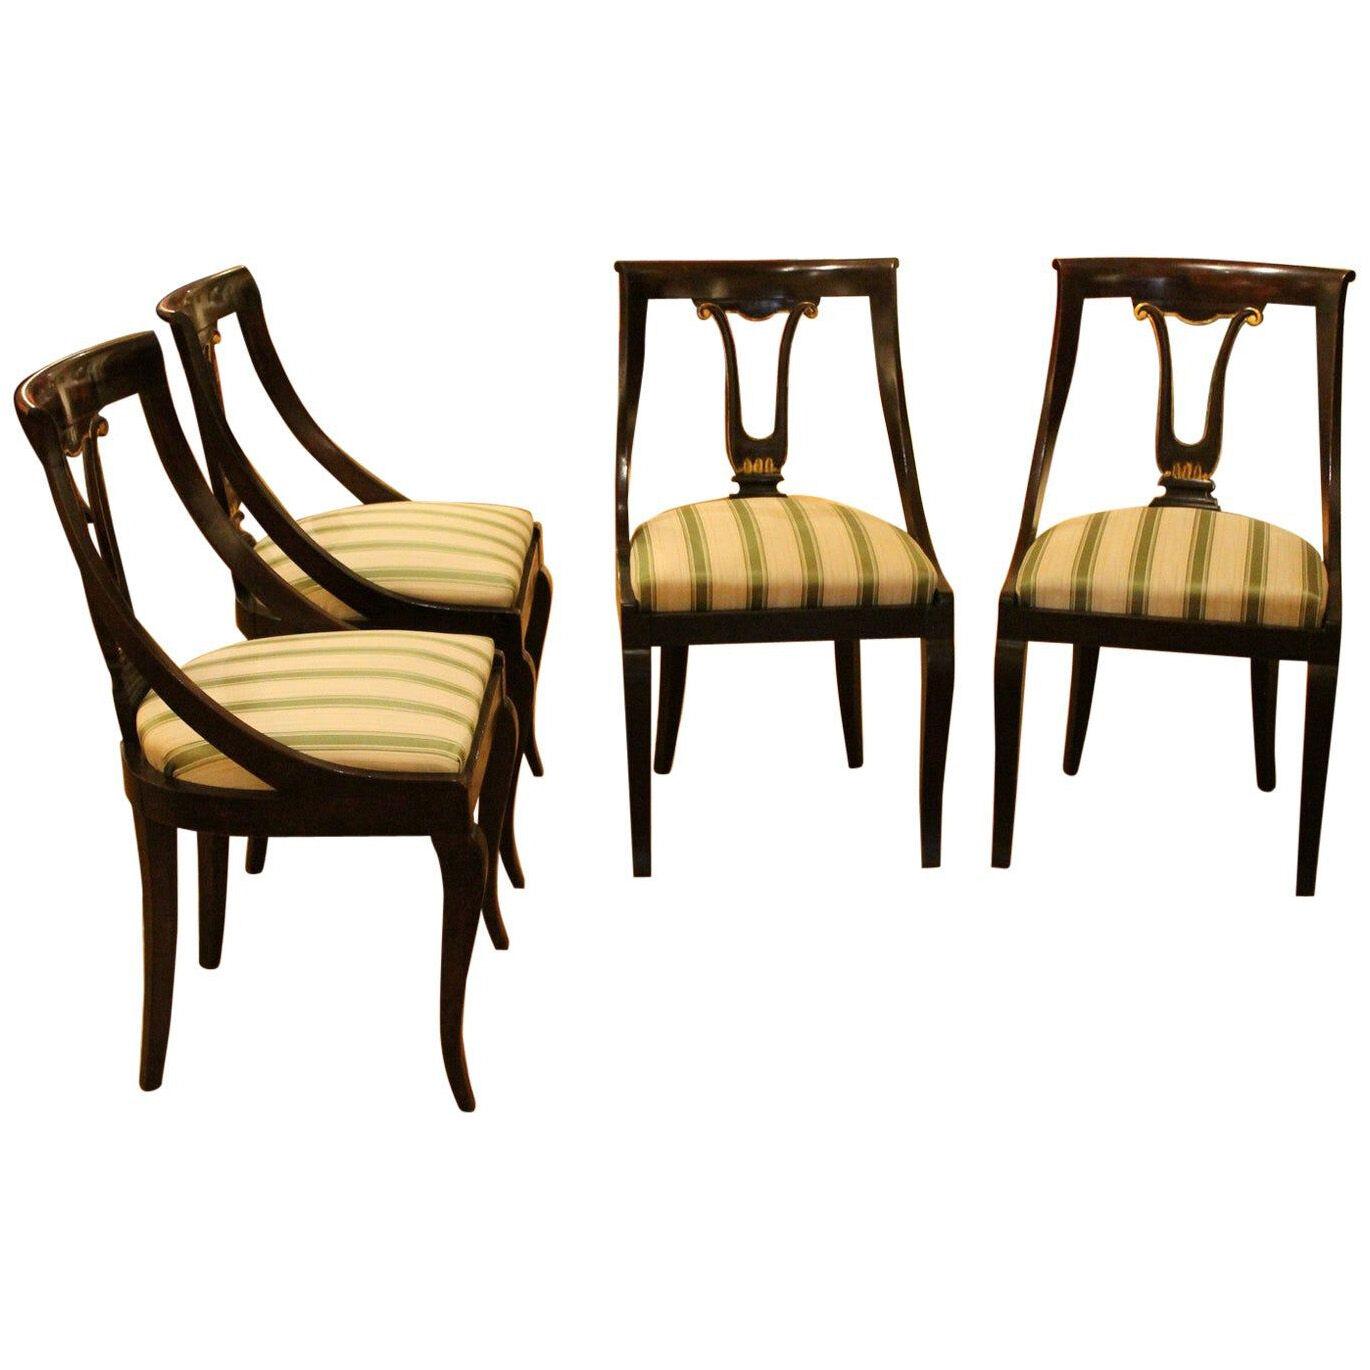 French 18th Century Directoire Mahogany Chairs with Silk Blend Upholster Fabric